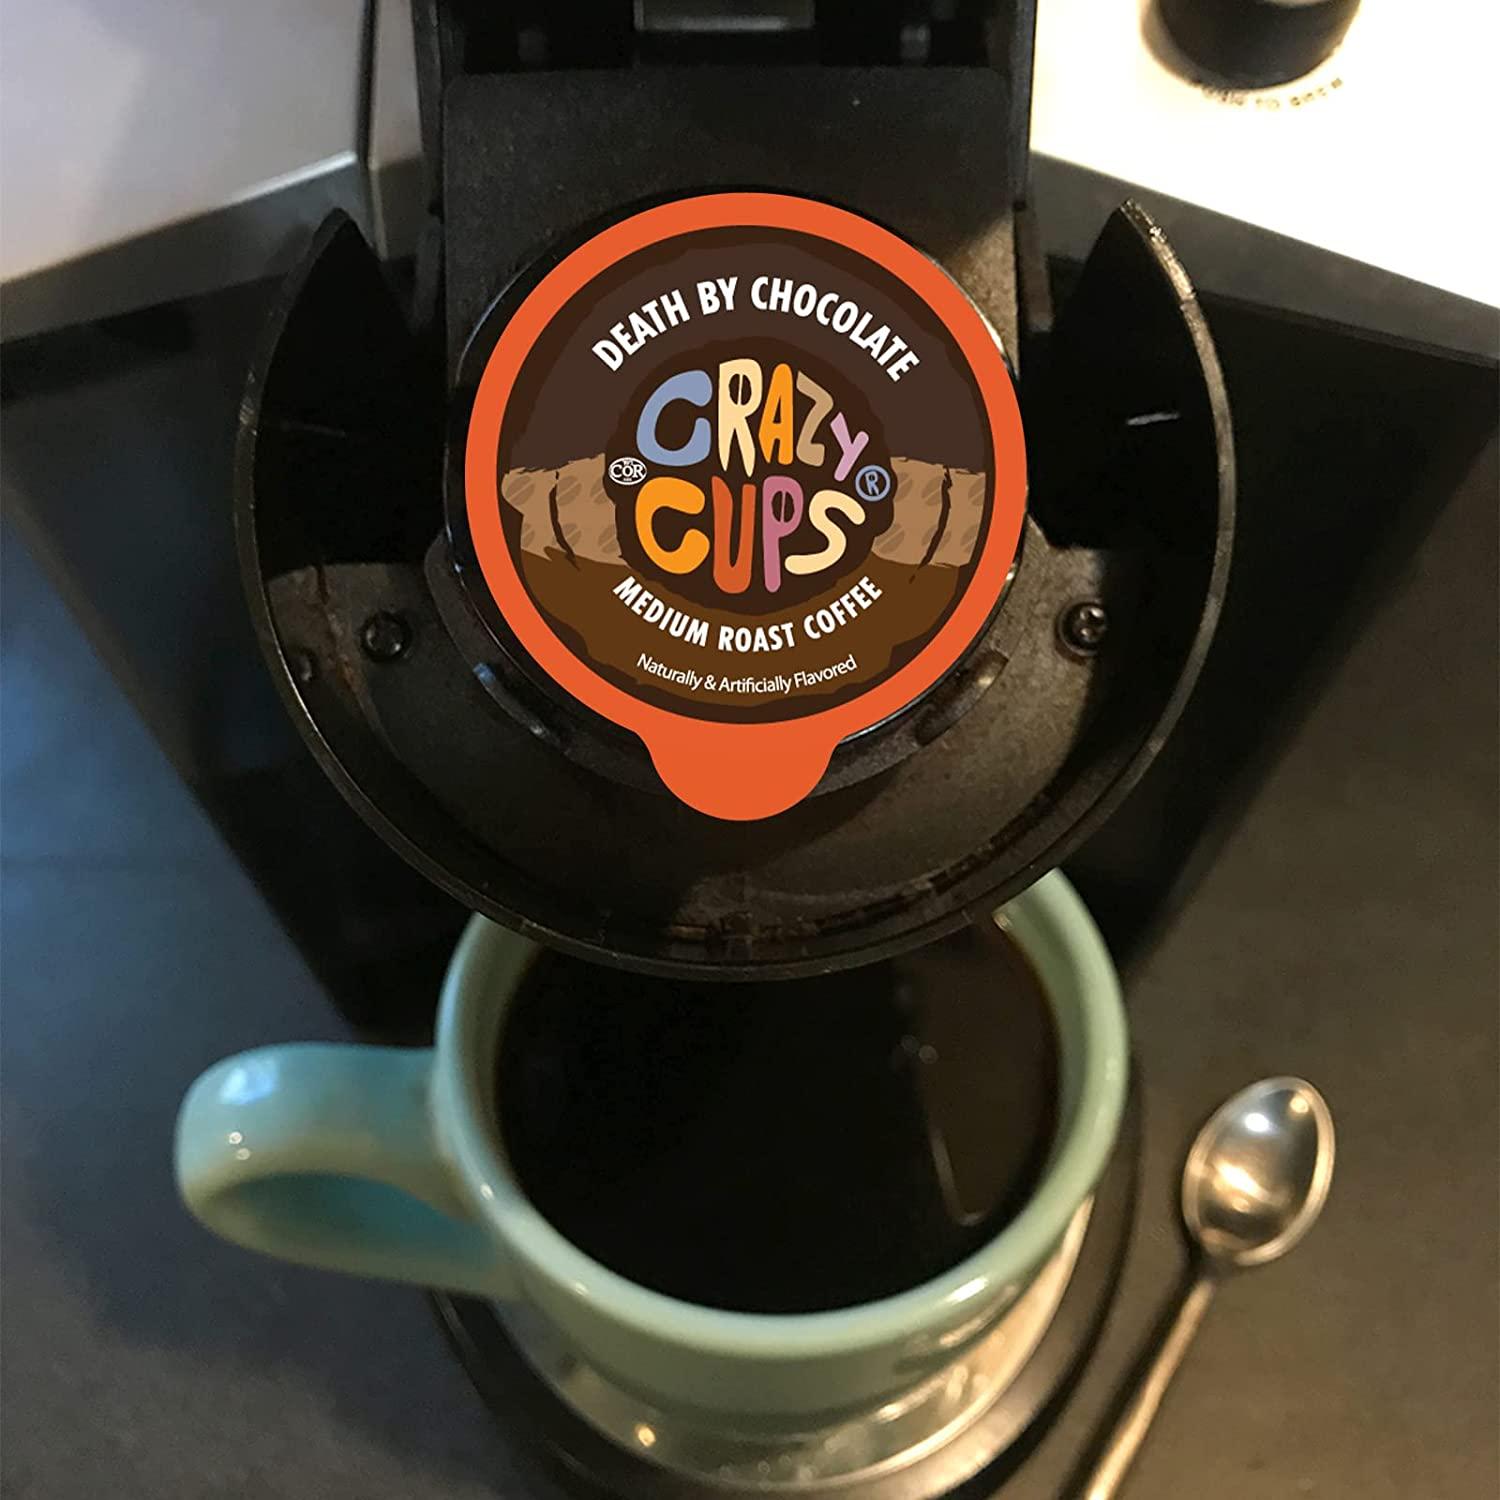 Crazy Cups Flavored Coffee Variety Pack Samplers